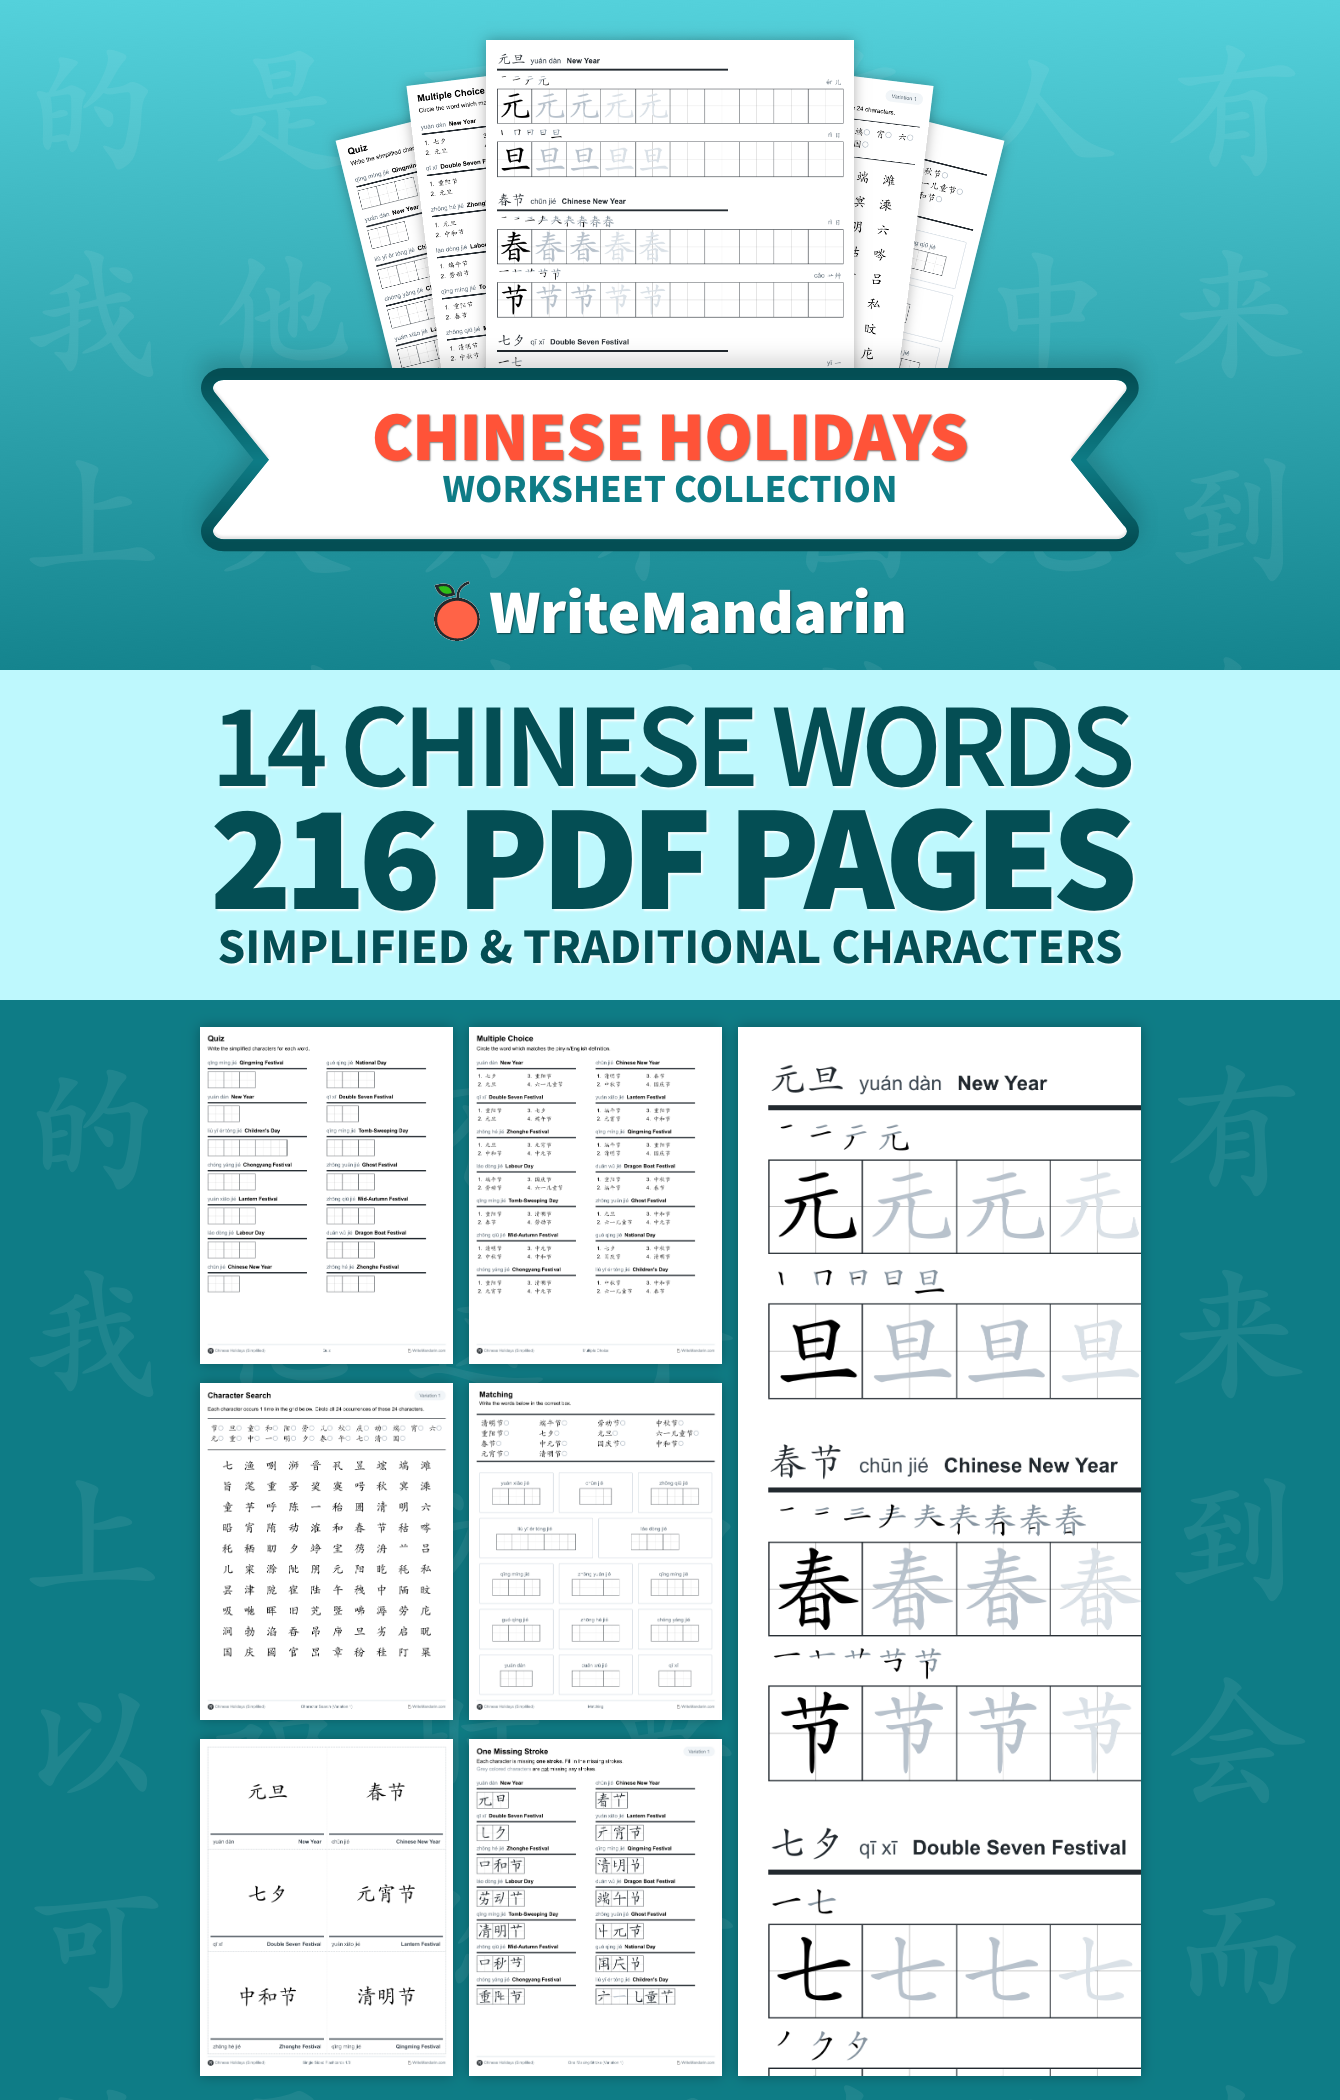 Preview image of Chinese Holidays worksheet collection